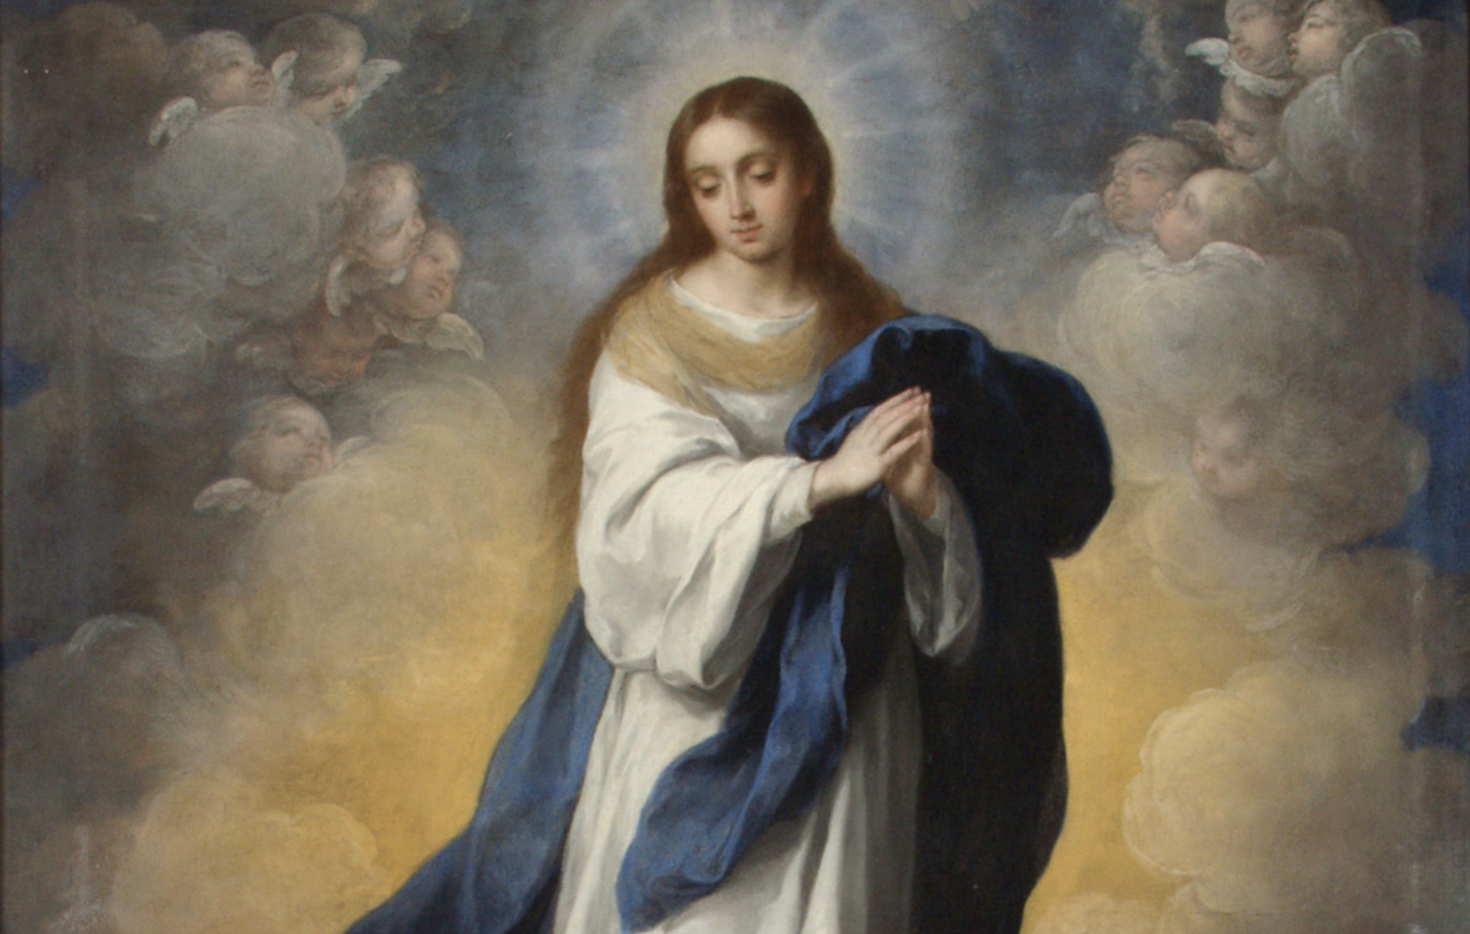 The Immaculate Conception of the Blessed Virgin Mary (1678) by Bartolomé Esteban Murillo - Public Domain Catholic Painting